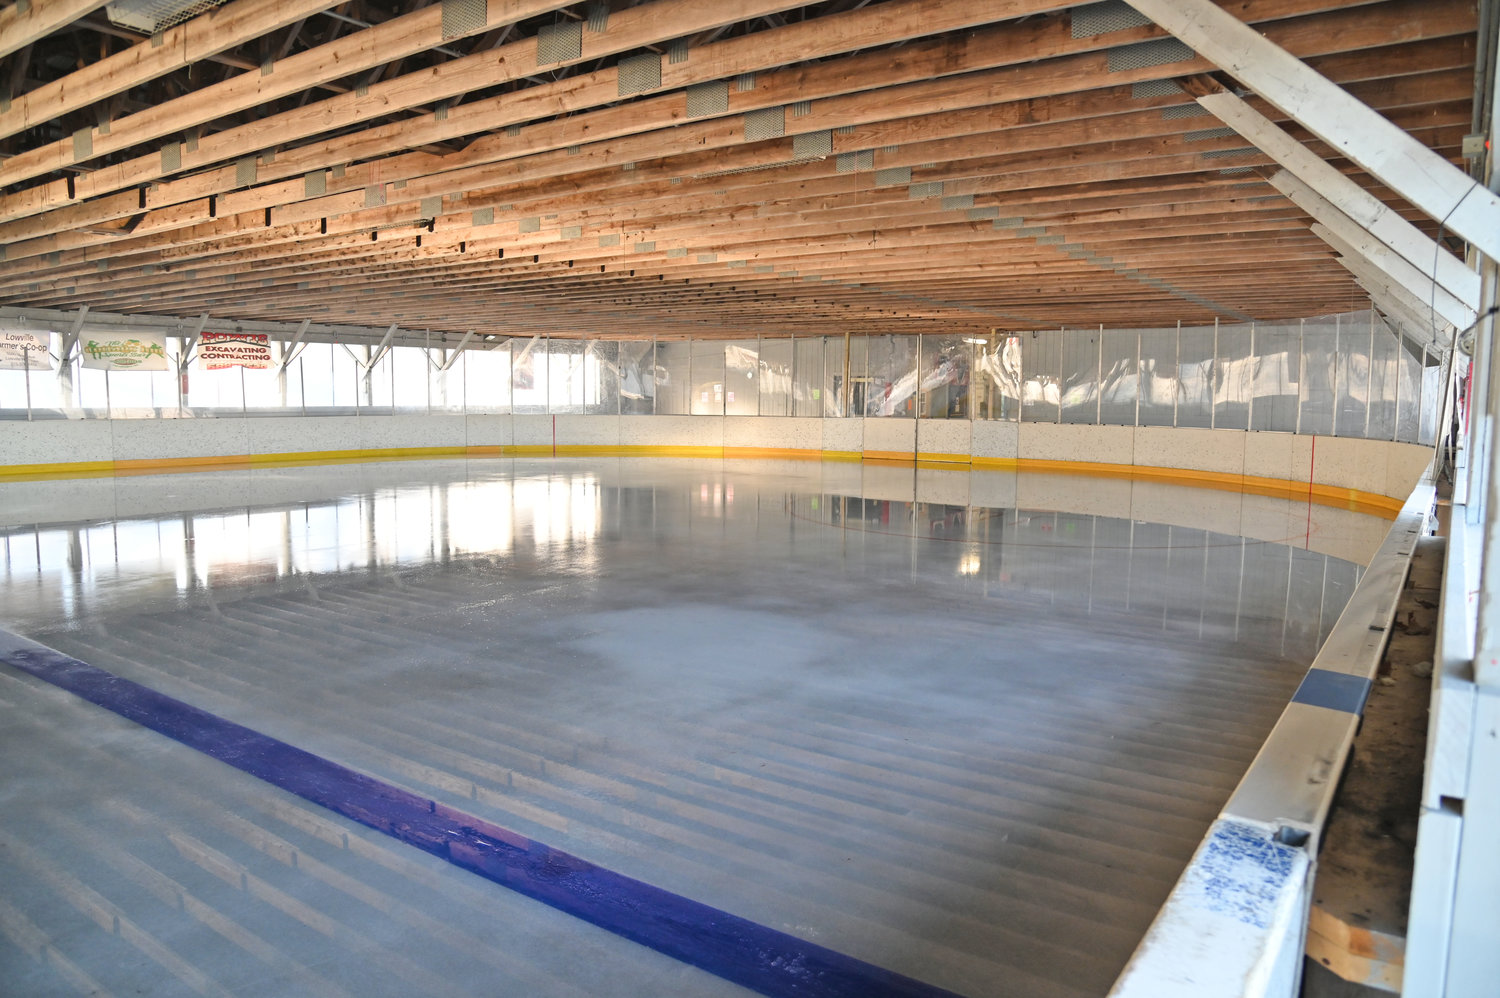 WARM WEATHER WOES — The Lowville Ice Rink, on the Lewis County Fairgrounds at 5473 Bostwick St., is temporarily closed as workers in the North Country village seek to fix the ice. For updates, go online to the rink Facebook page at https://www.facebook.com/lewiscountyicerink/.